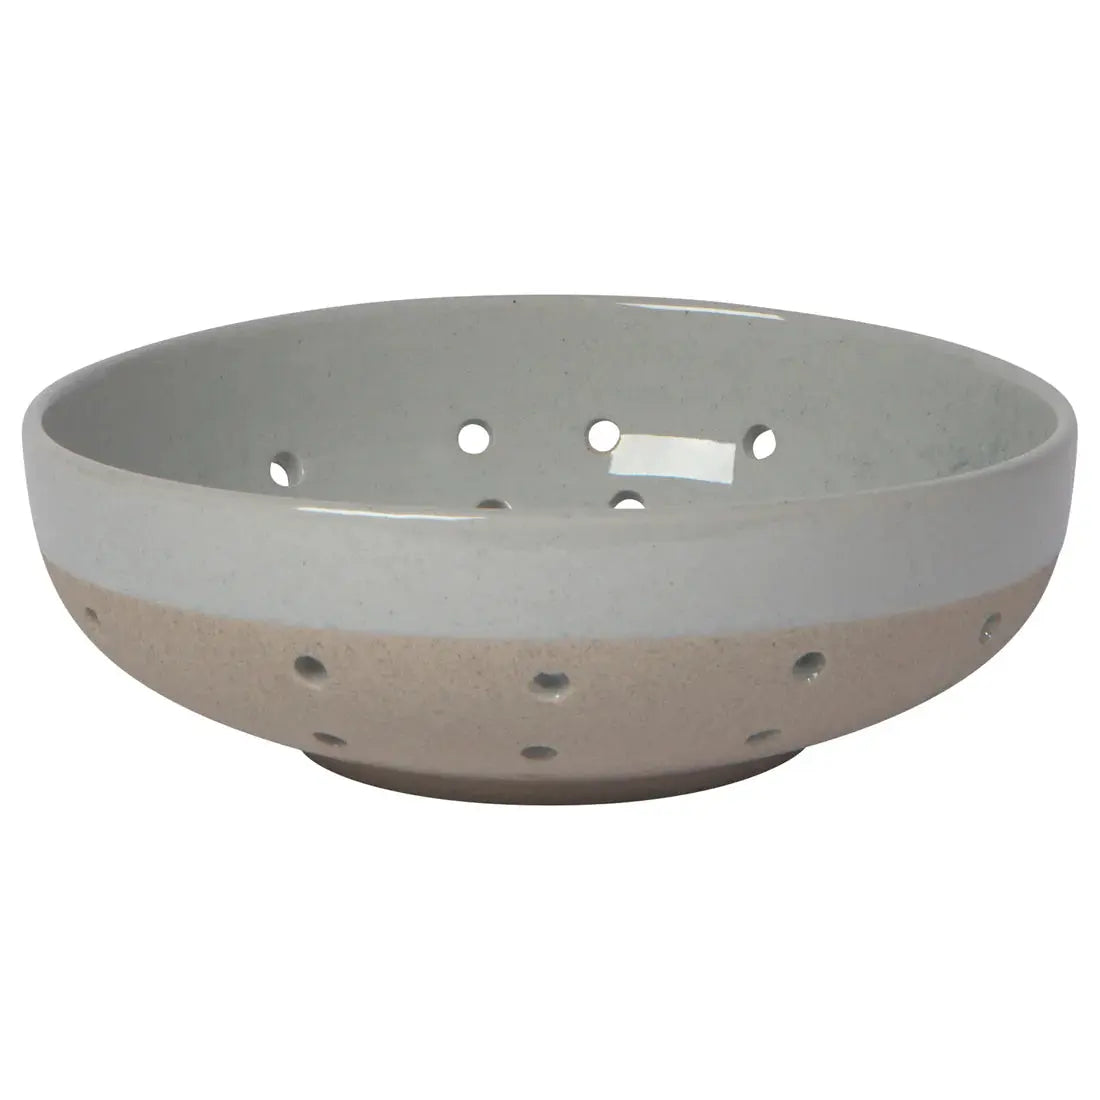 Copy of Droplet Element Bowl Small 4.75 inch  Browns Kitchen